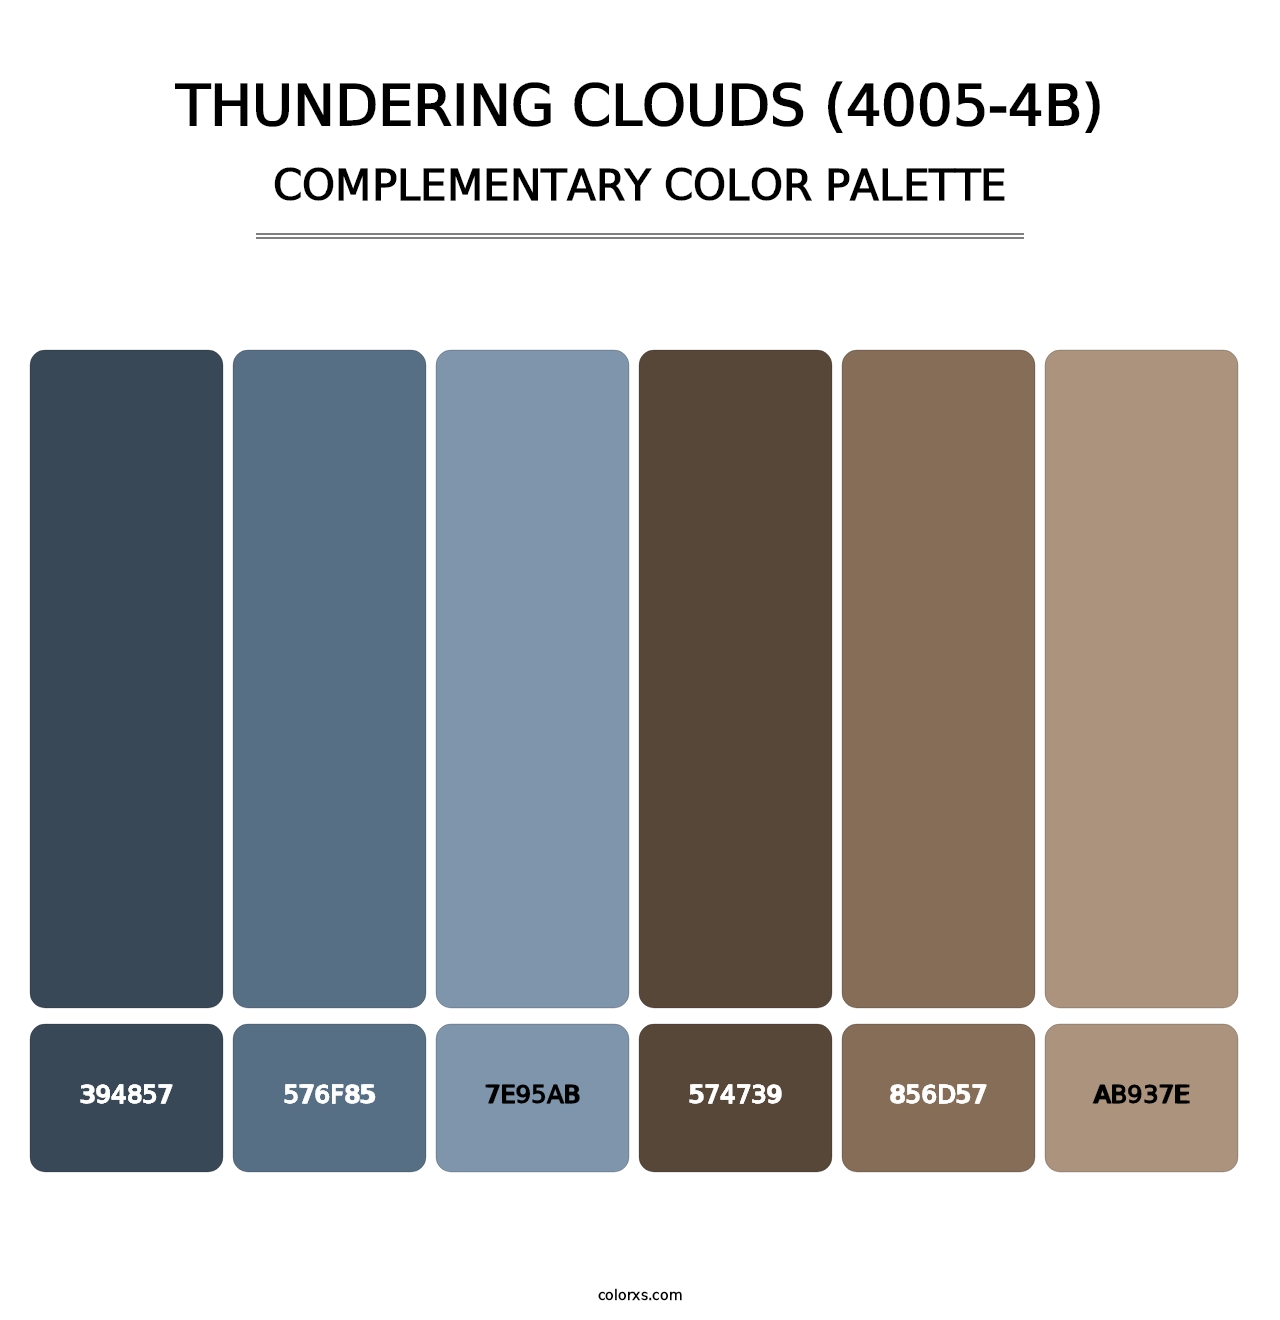 Thundering Clouds (4005-4B) - Complementary Color Palette